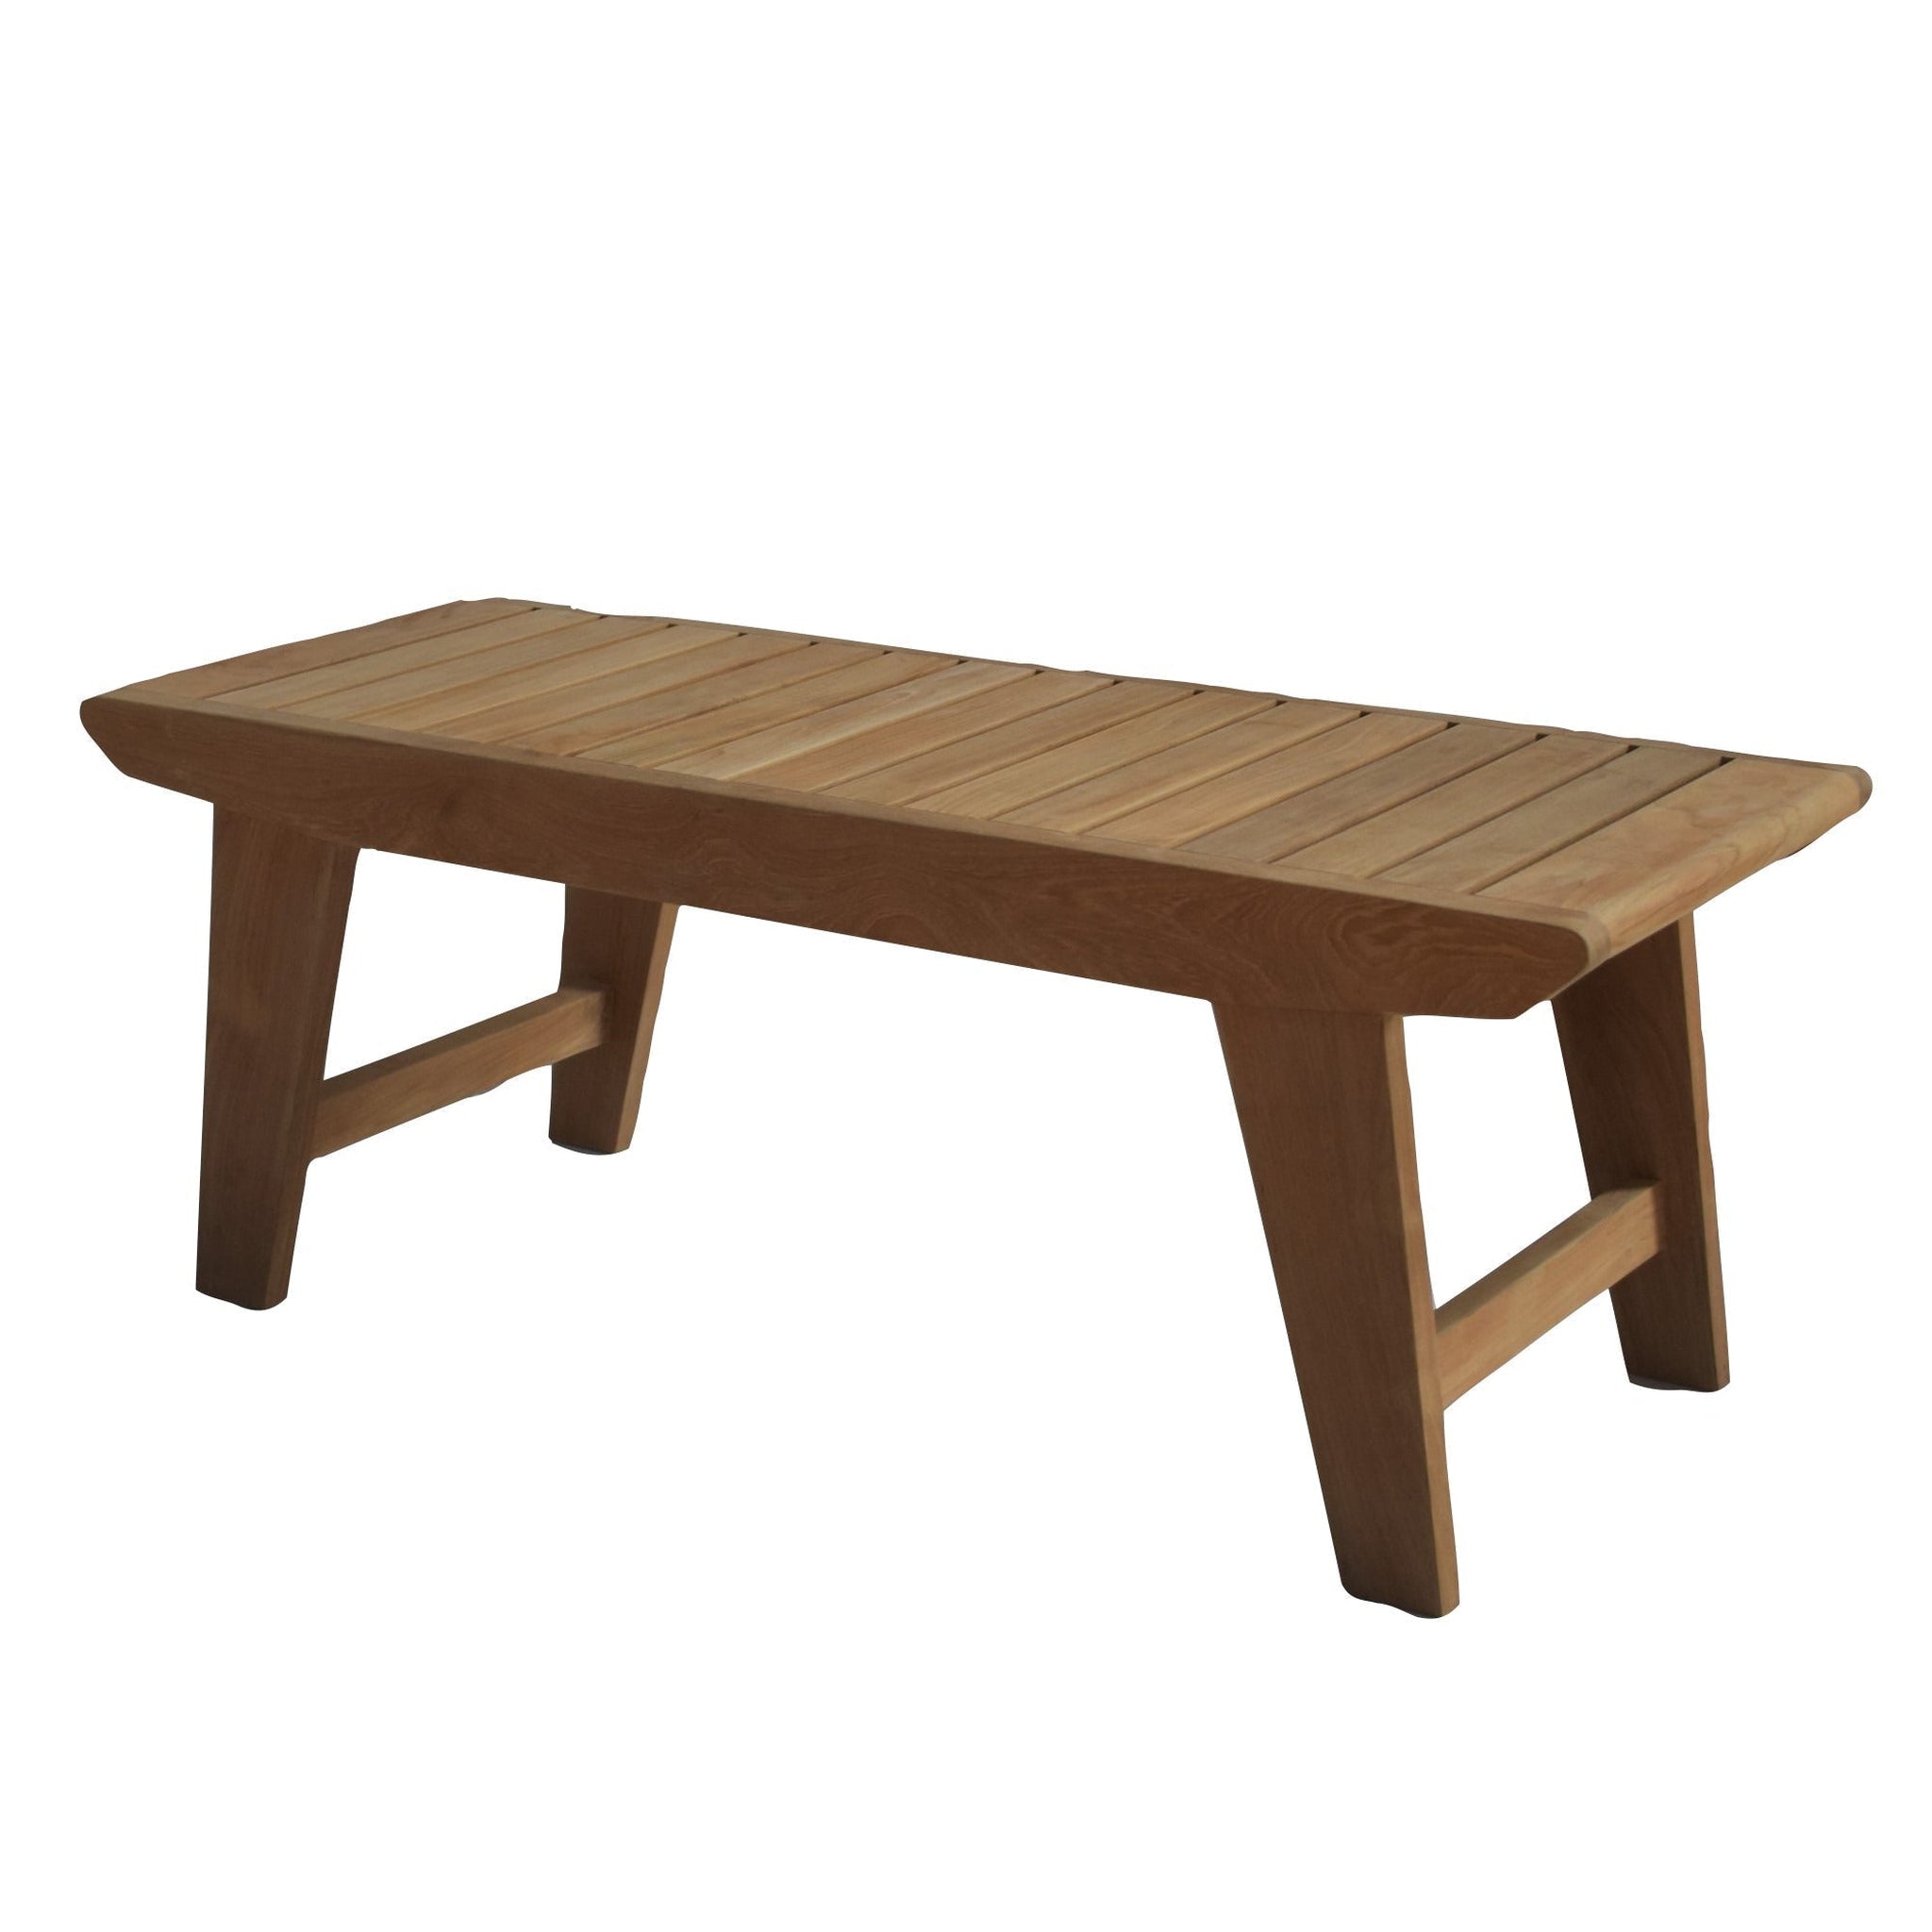 Can Teak Wood Get Wet? Discover the Powerful Benefits of Owning Teak Furniture